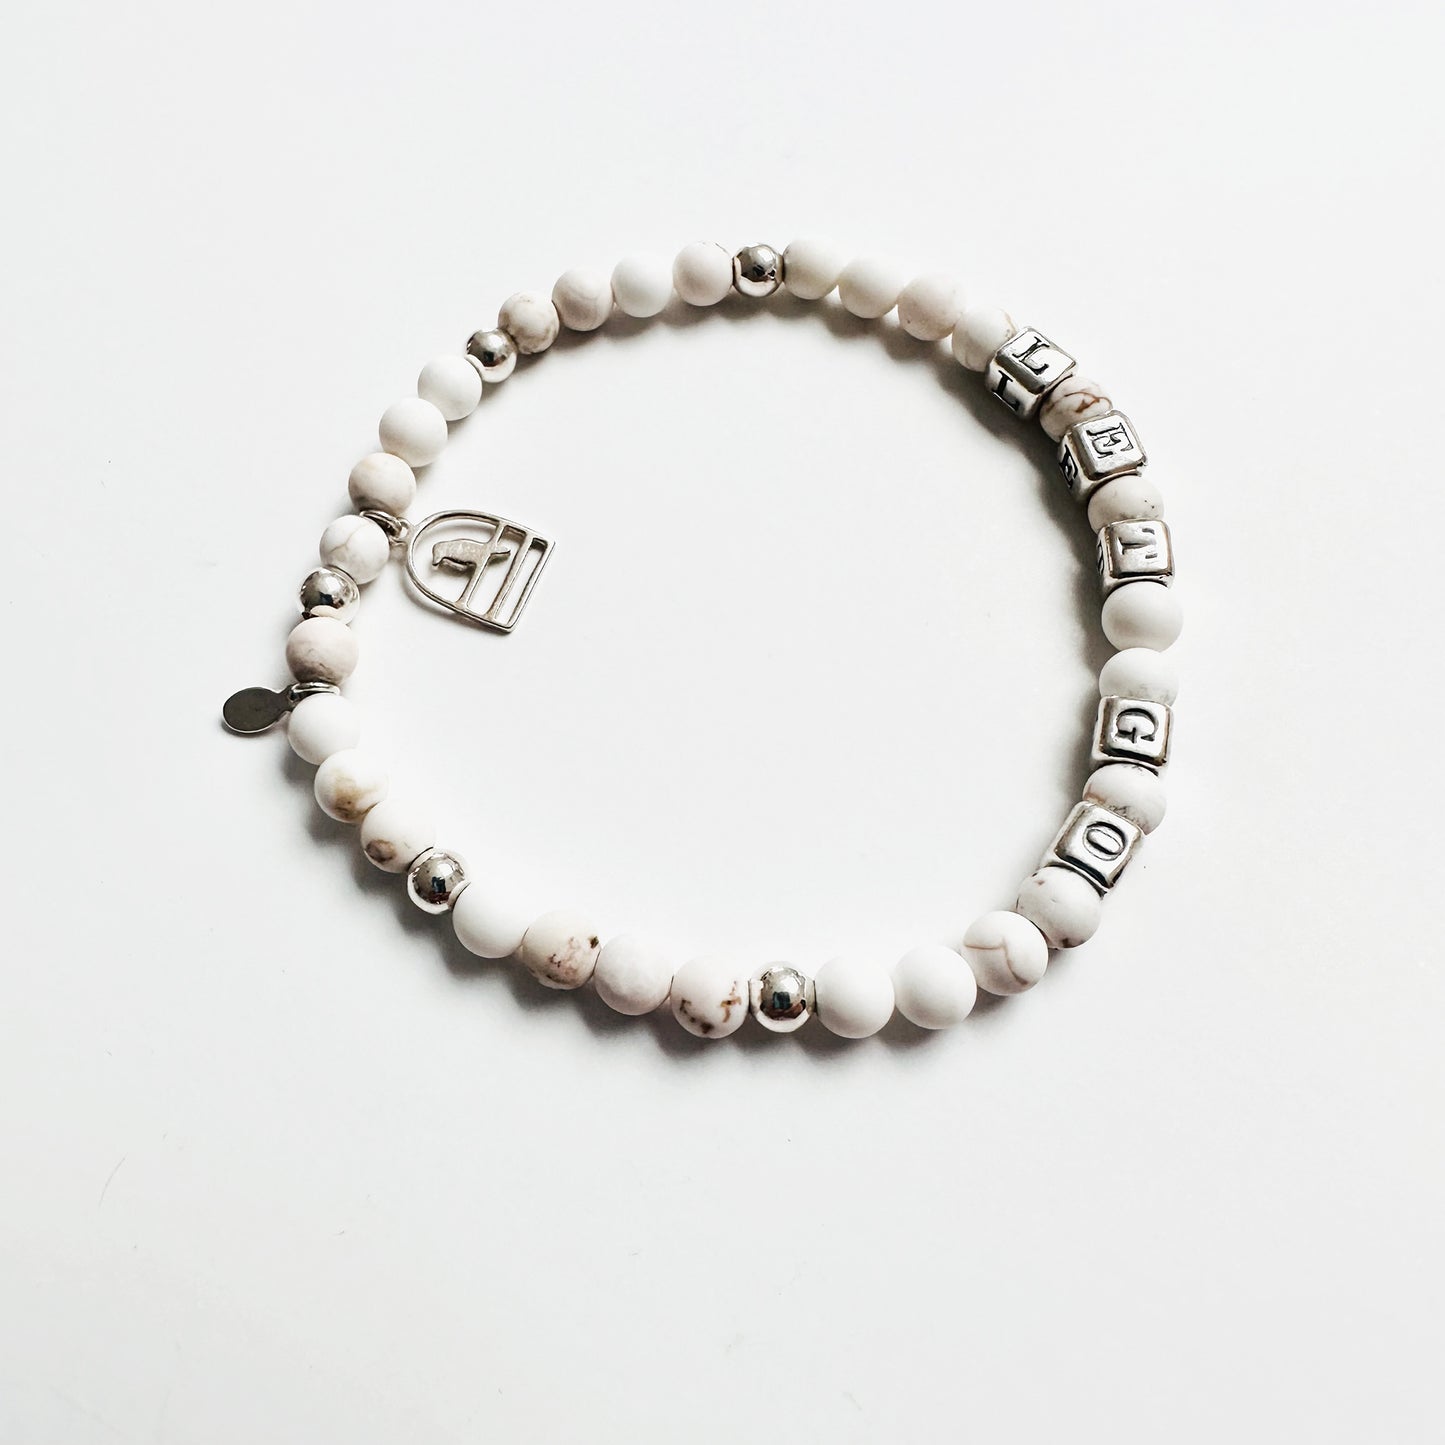 Let Go stretch bracelet in sterling silver and white howlite beads, with sterling silver bird charm